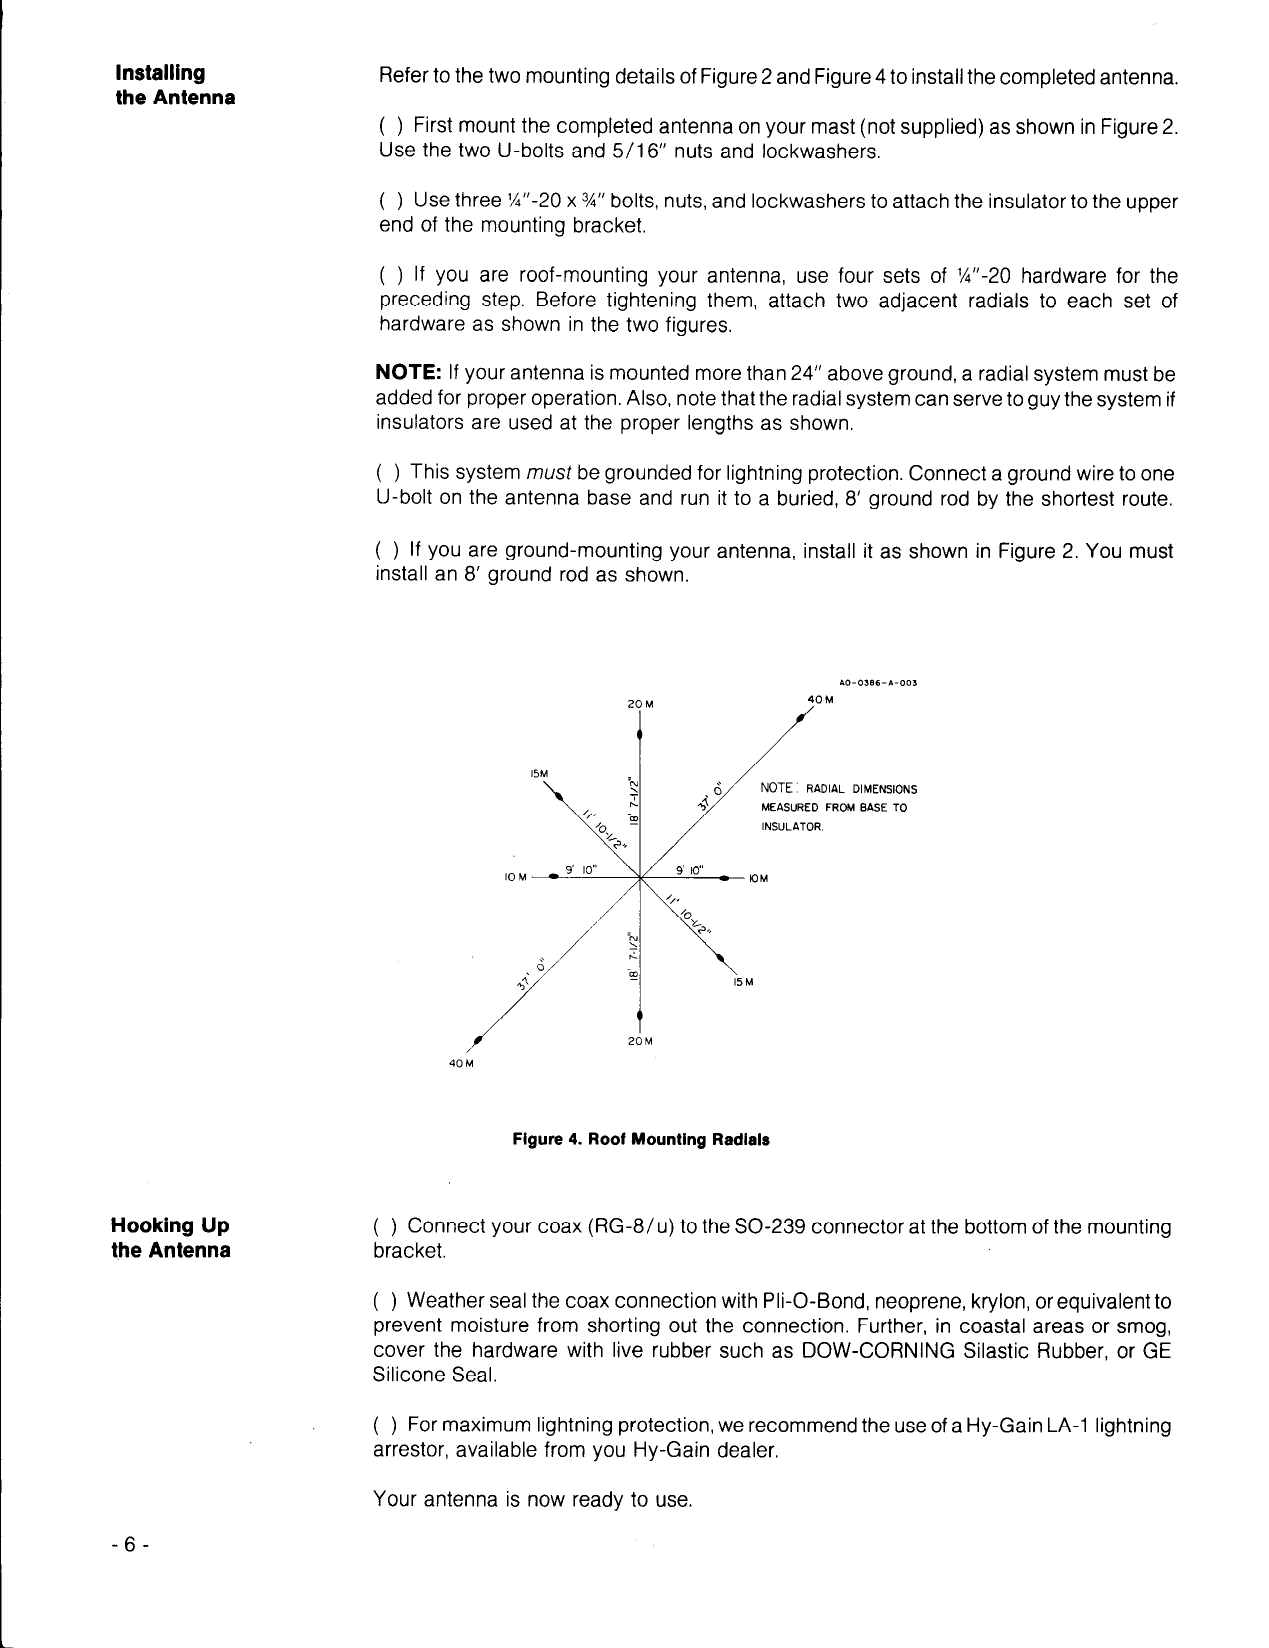 Page 7 of 10 - HY-GAIN--18-AVT-WB-VERTICAL